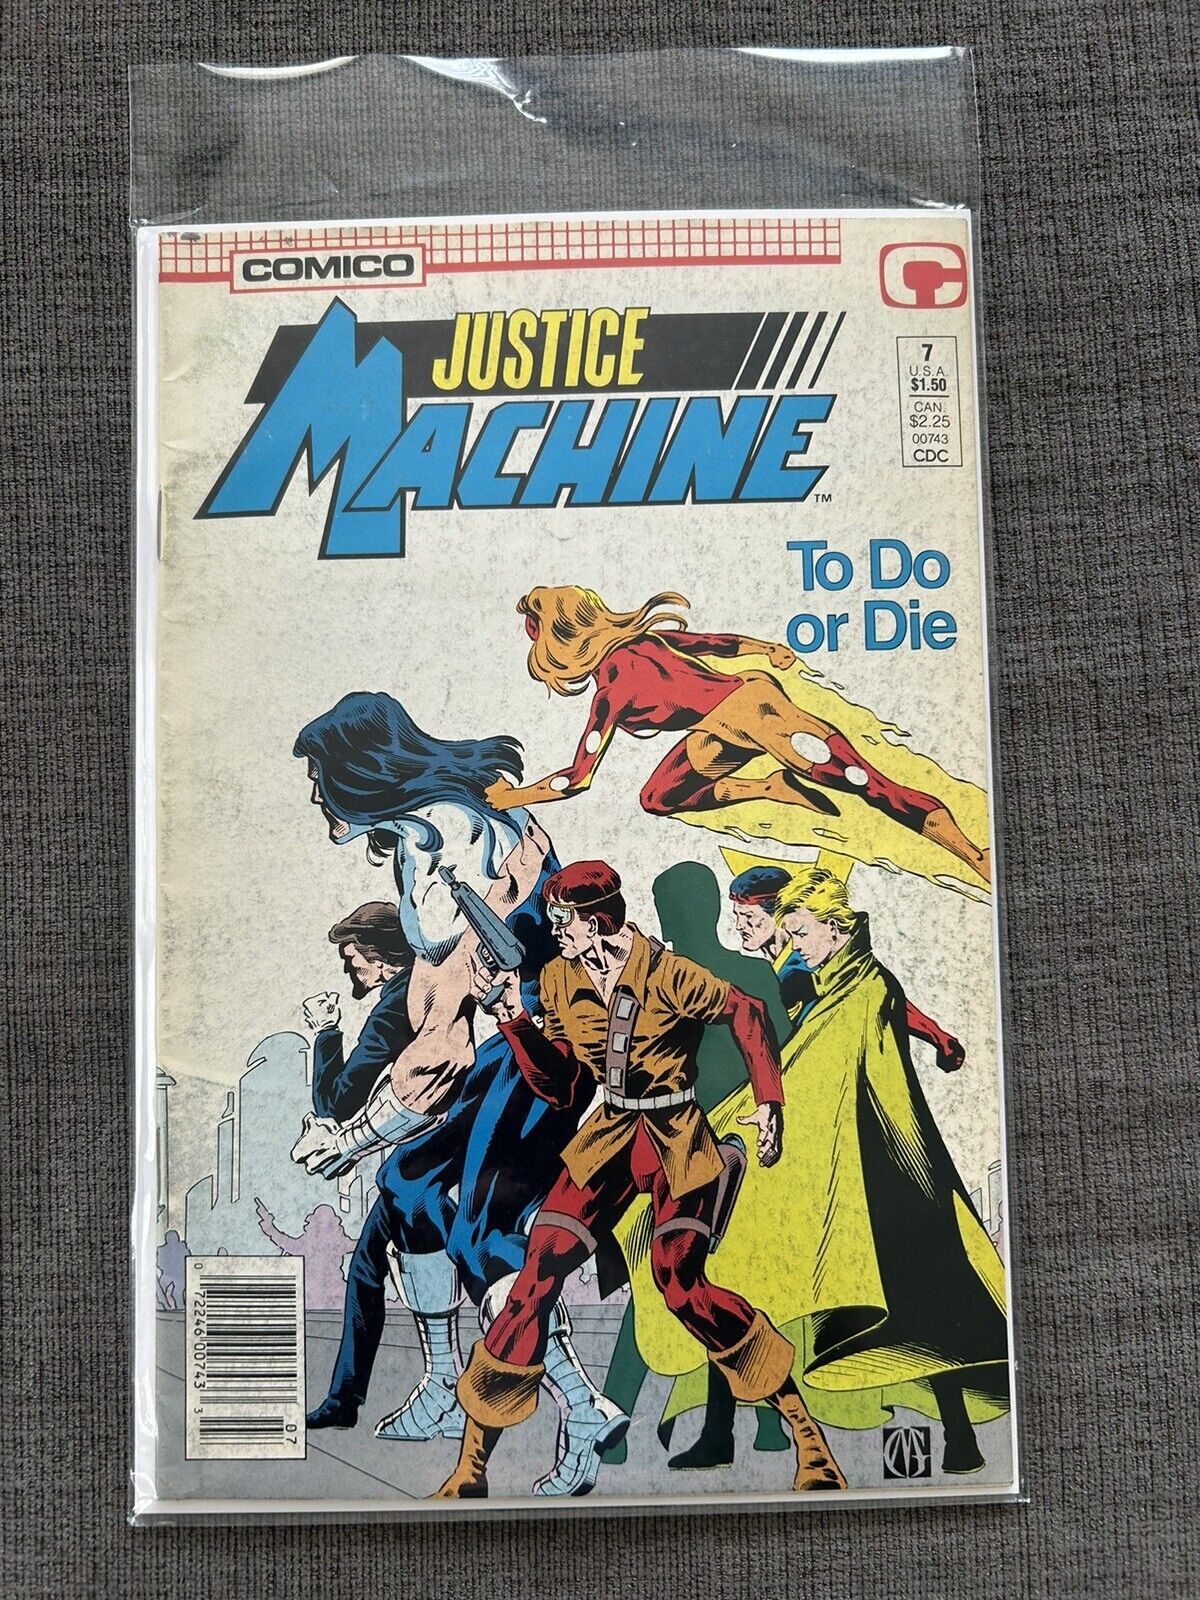 Justice Machine # 7, July 1987, “To Do or Die”, Comico, Pre-Owned VG Condition